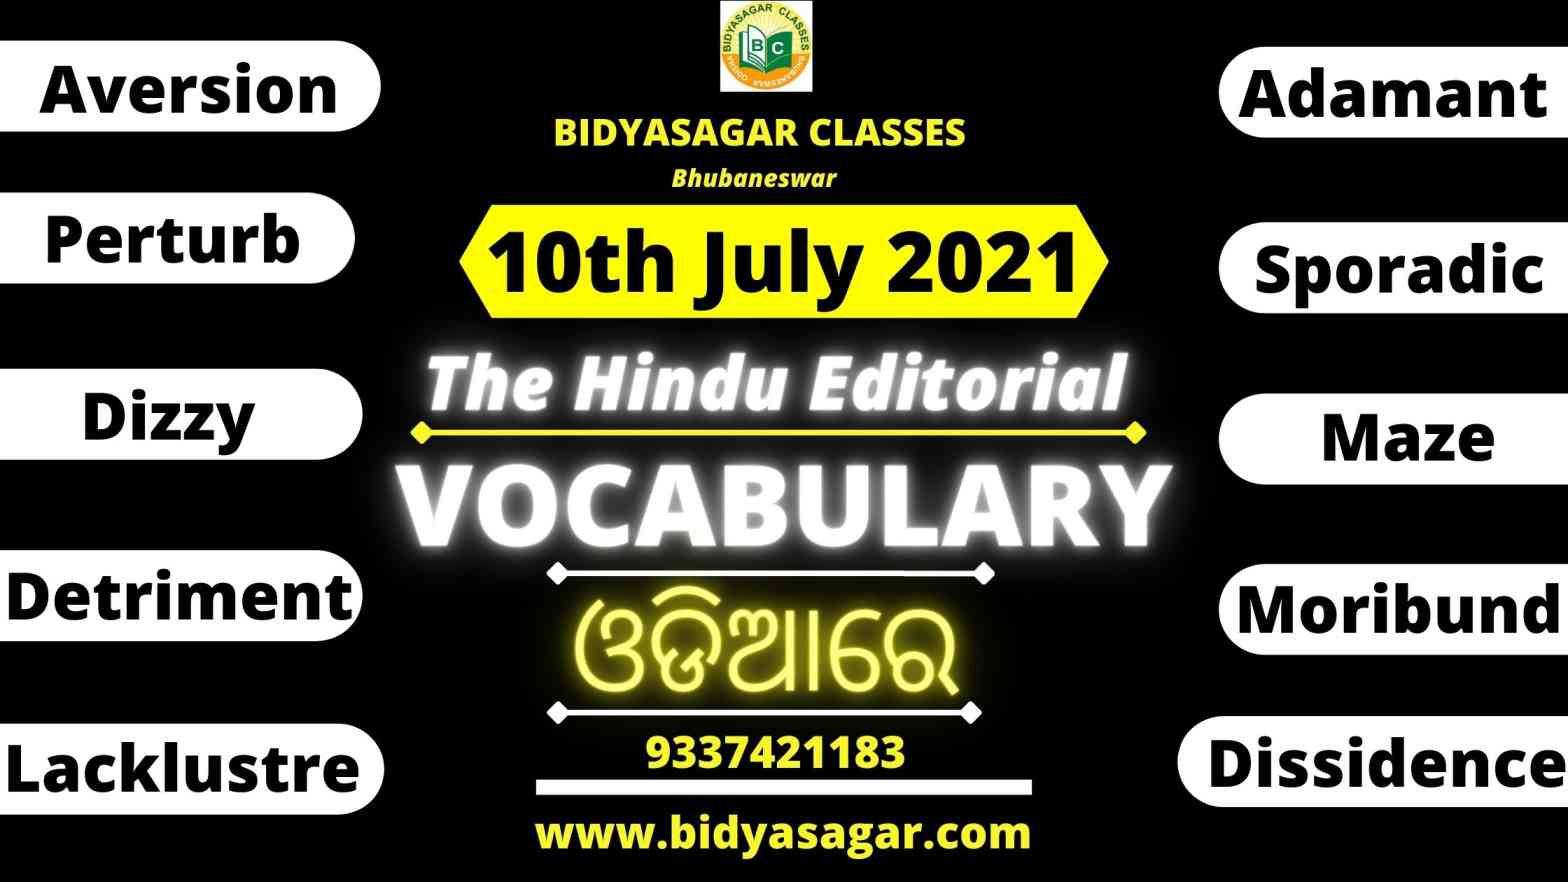 The Hindu Editorial Vocabulary of 10th July 2021